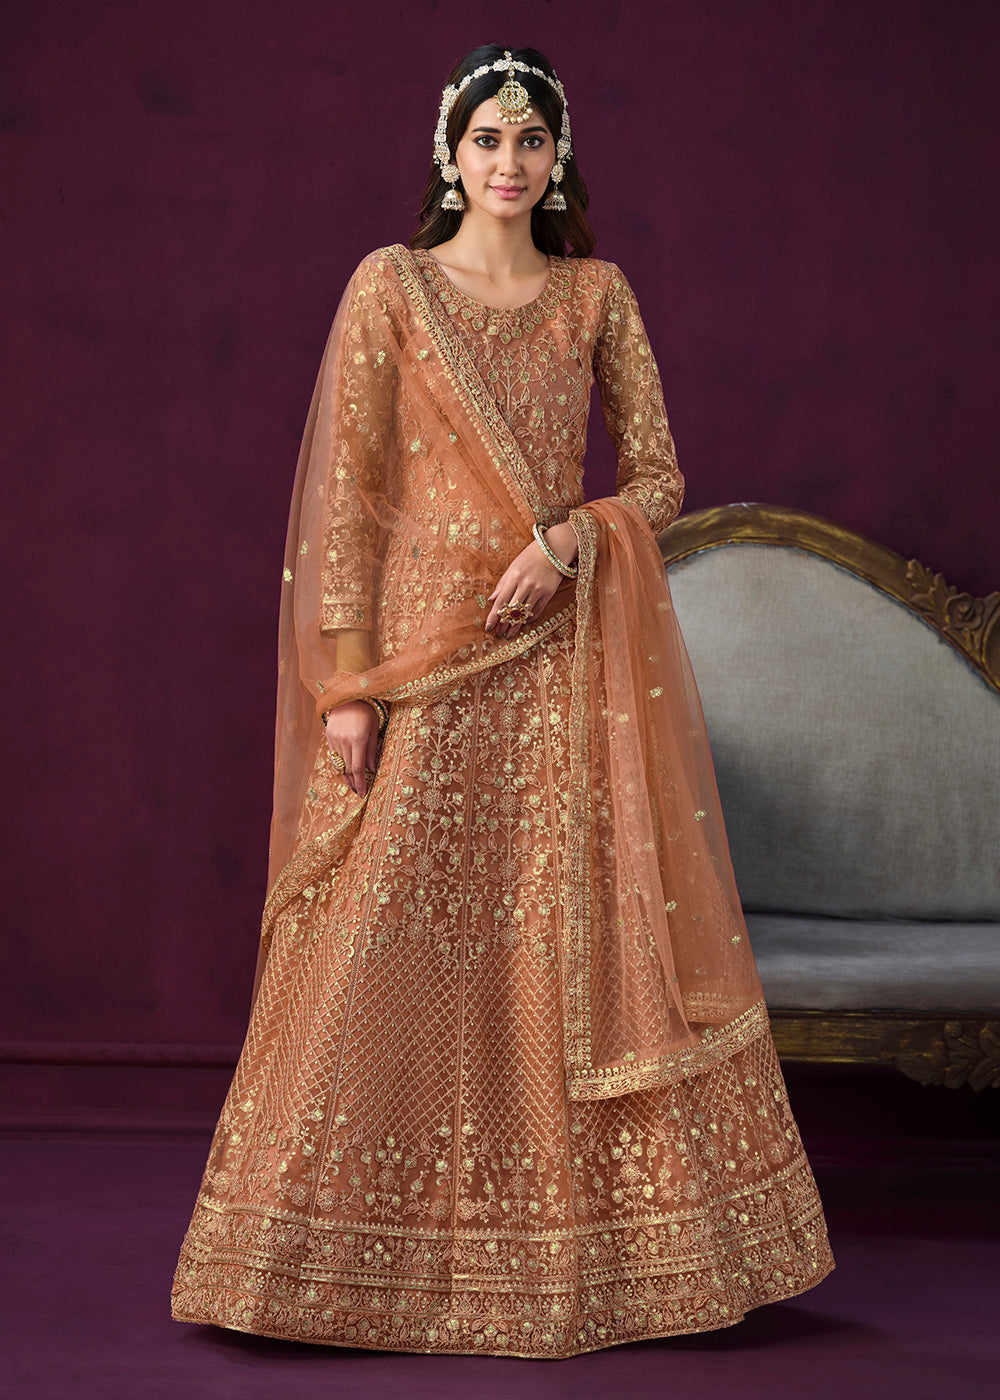 Buy Now Charming Orange Embroidered Net Floor Length Anarkali Suit Online in USA, UK, Australia, New Zealand, Canada & Worldwide at Empress Clothing.